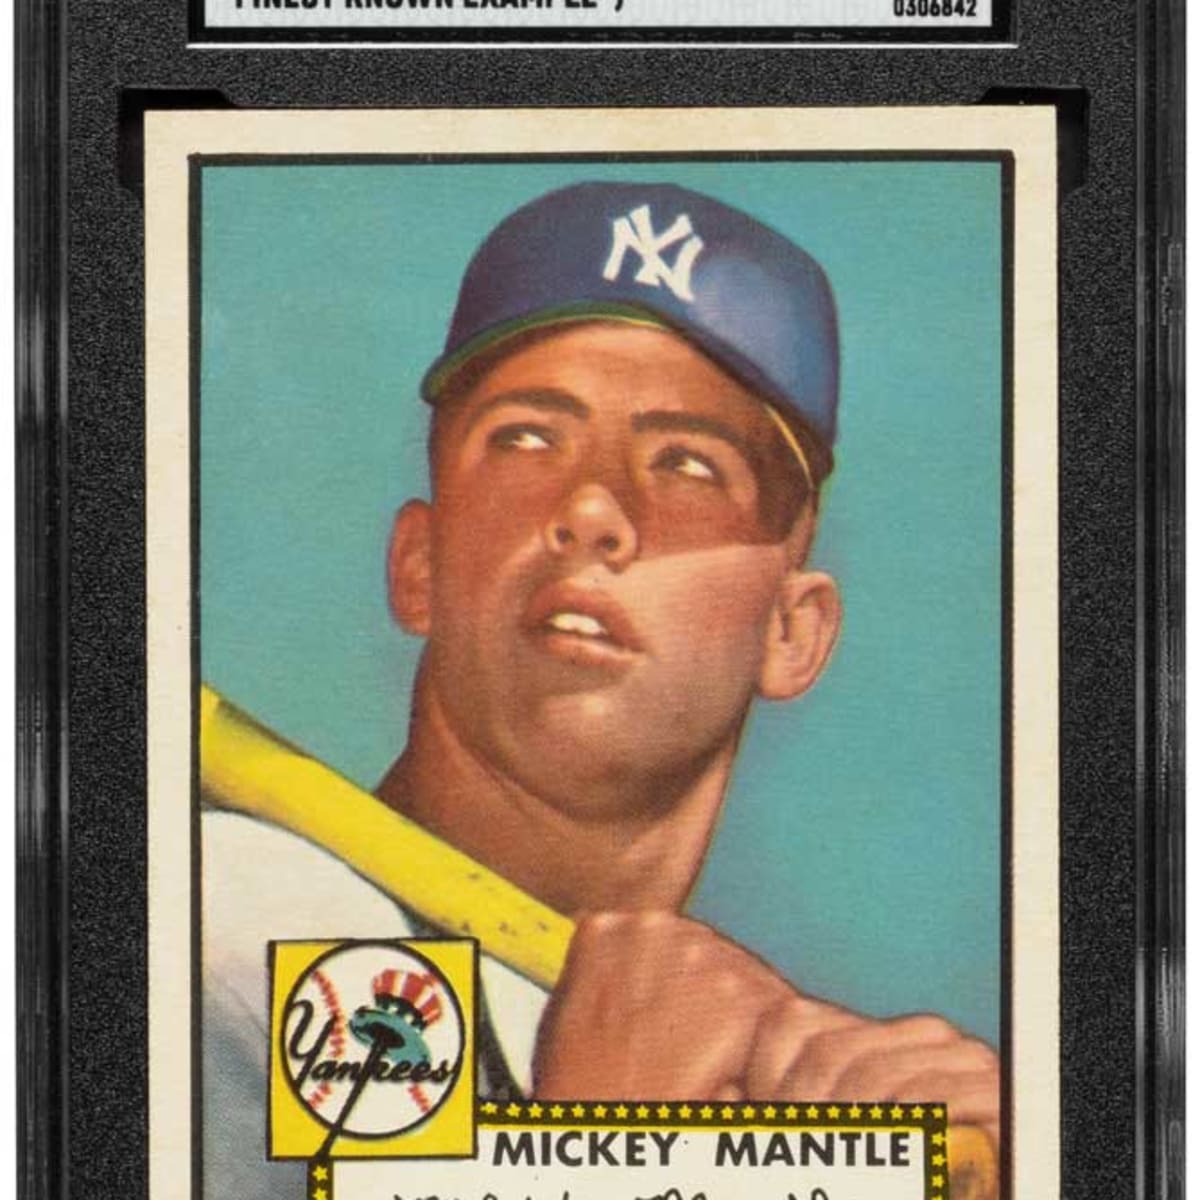 1952 Mickey Mantle baseball card sells for $2.88 million: Report - ABC News